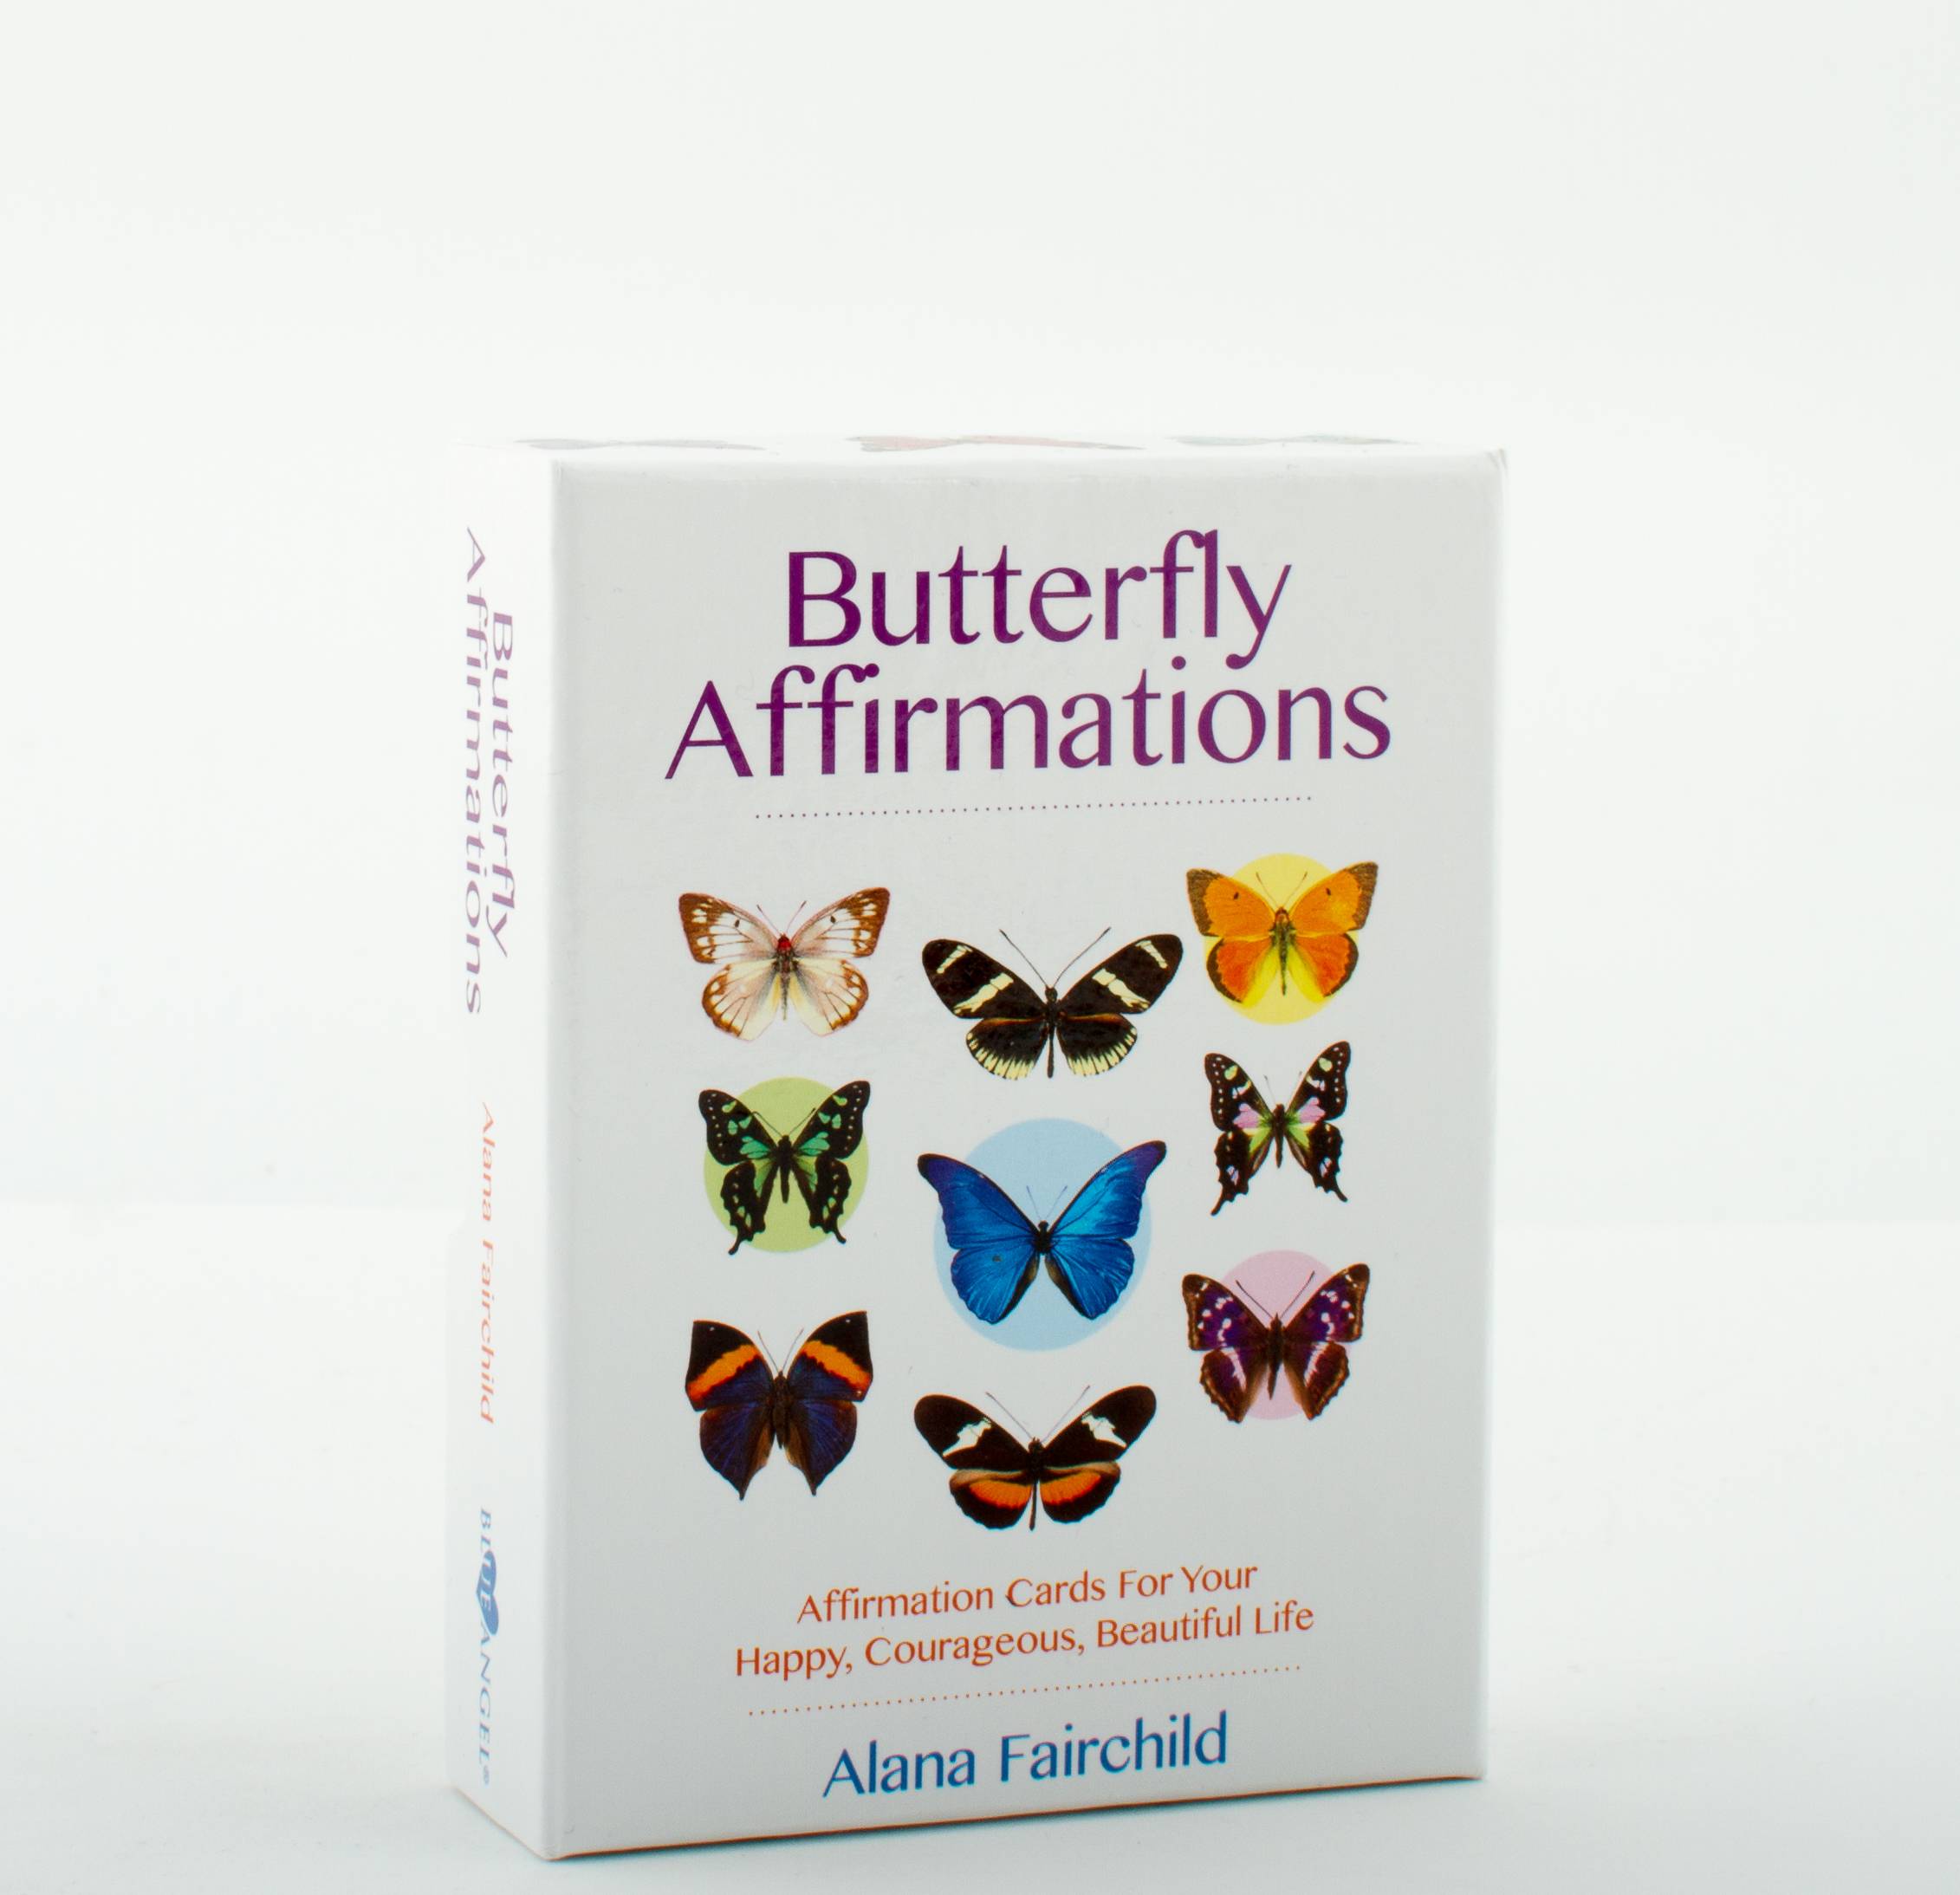 Butterfly Affirmations : Affirmation Cards For Your Happy, Courageous, Beautiful Life